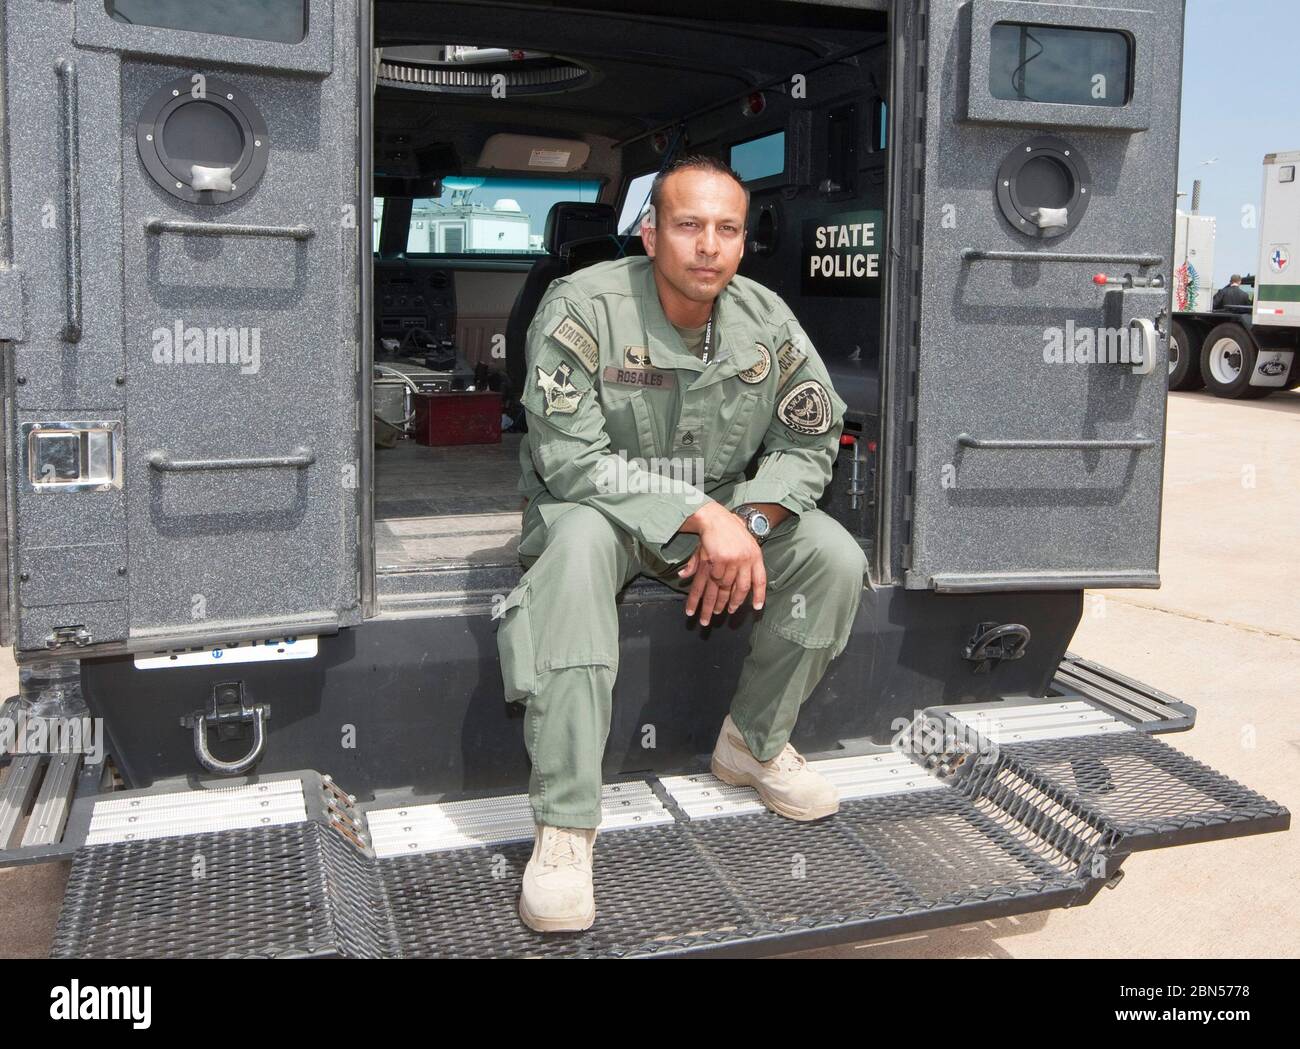 Austin Texas USA, June 2012: Member of the Texas Department of Public Safety S.W.A.T team sits in the door of an armored vehicle during a hurricane preparedness exercise.  ©Marjorie Kamys Cotera/Daemmrich Photography Stock Photo